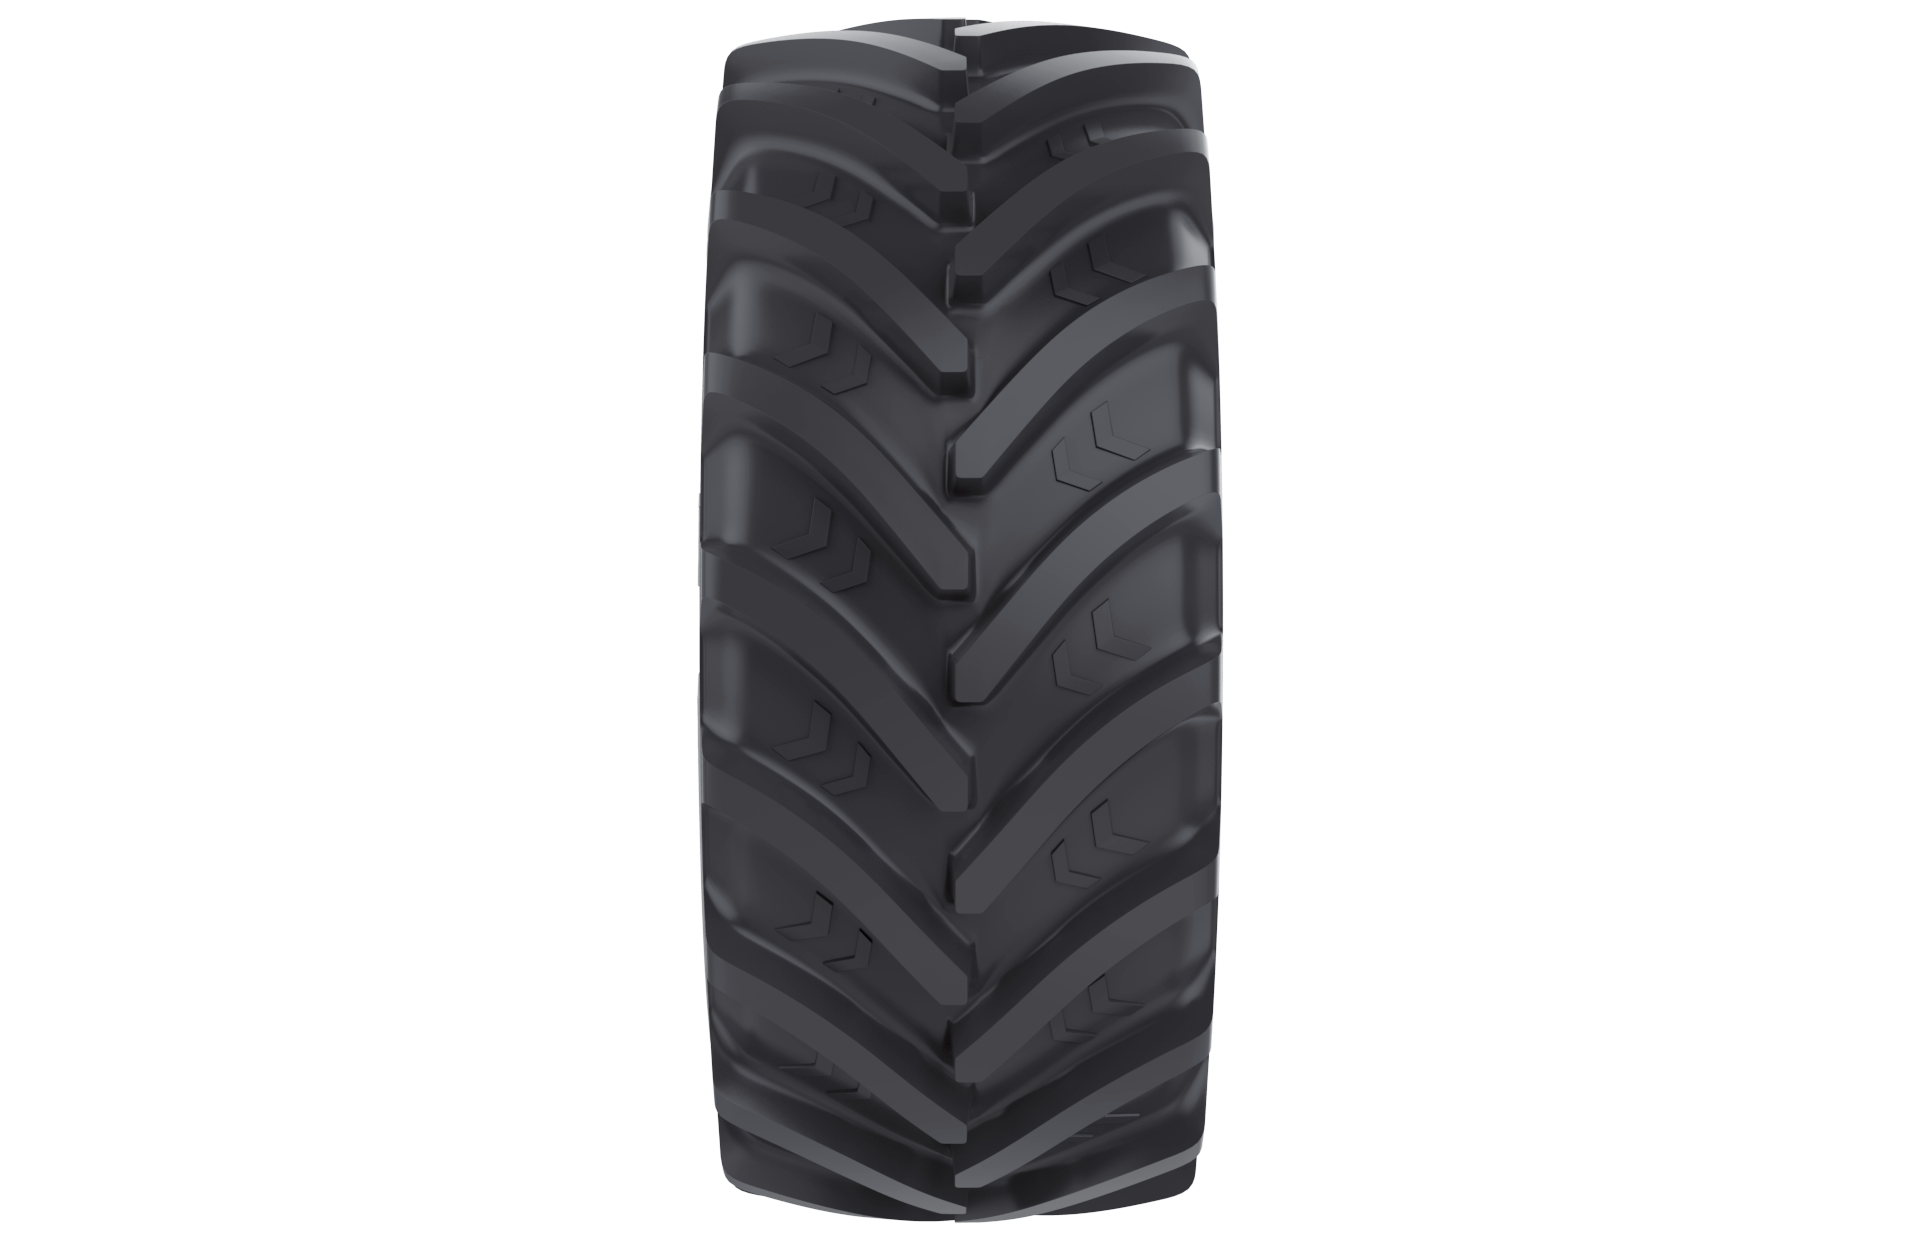 ASCENSO VF 800/70R38 NRO 187D R1-W TL VDR2000 STEEL BELTED / STUBBLE GUARD